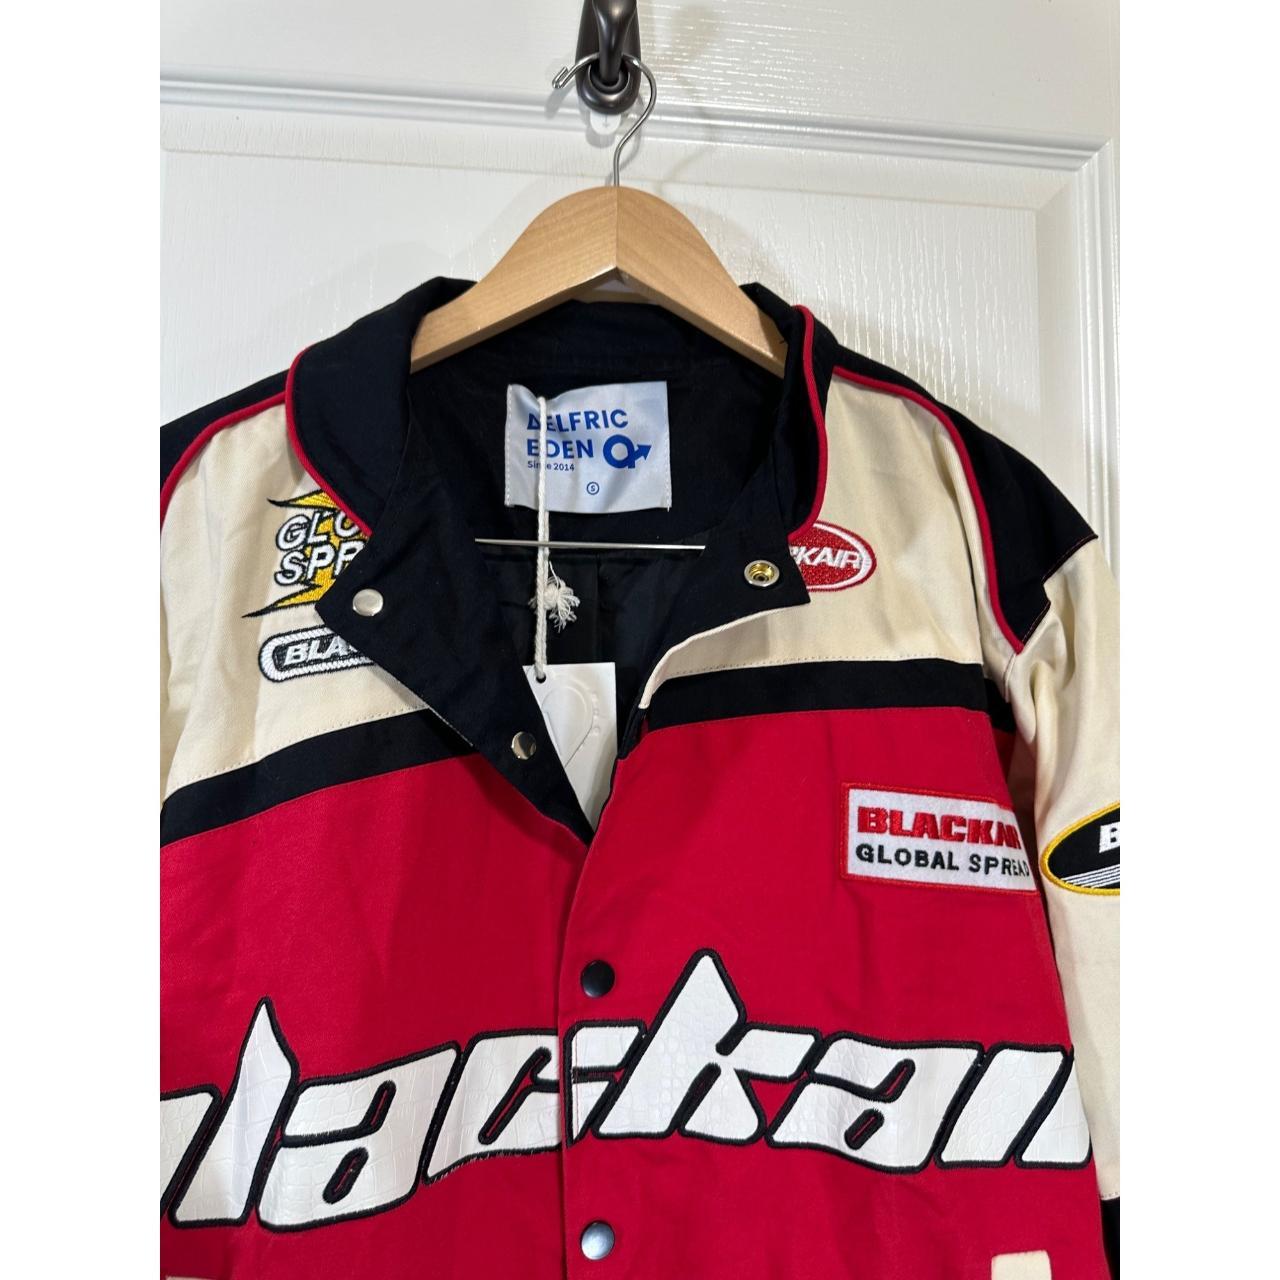 Elfric Eden Racing Jacket New with Tags Size... - Depop